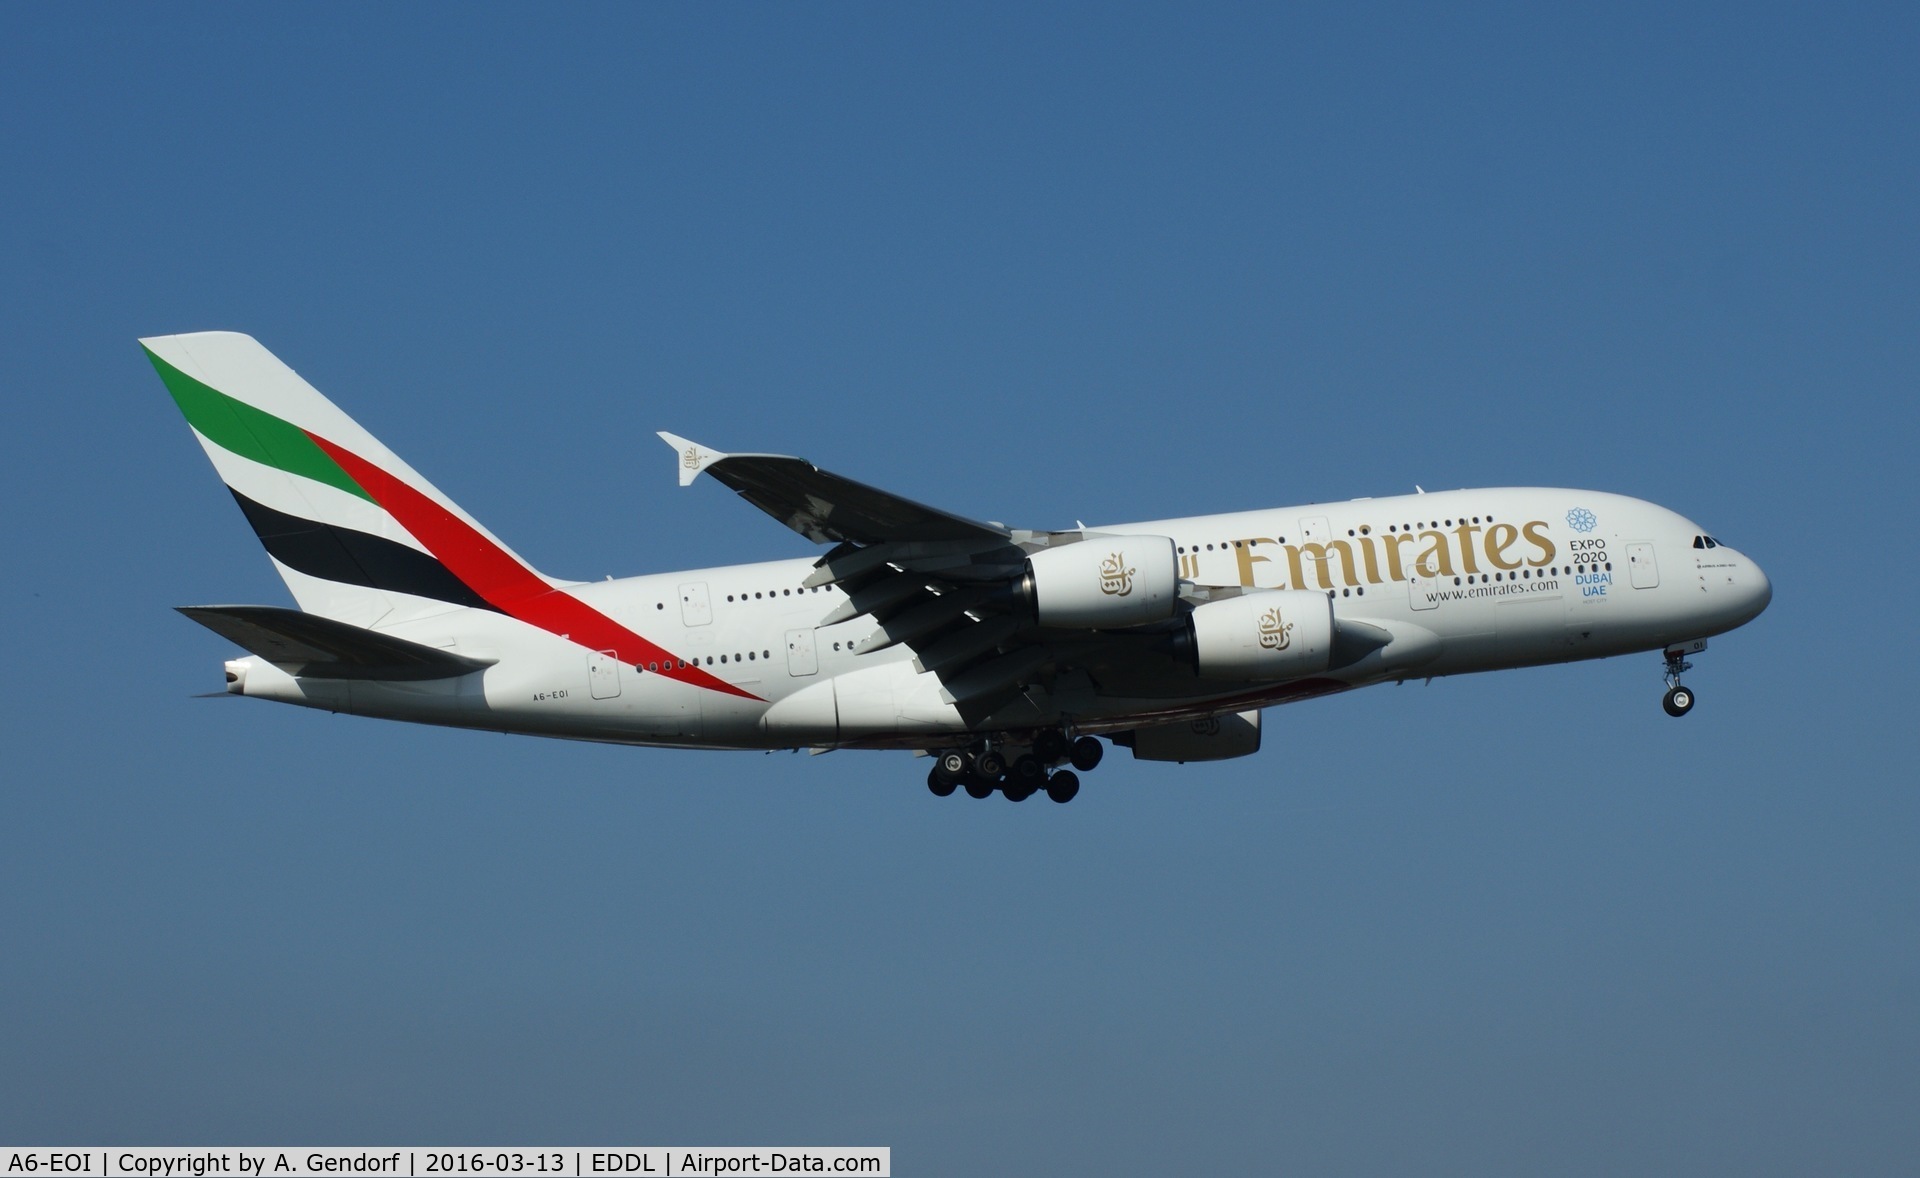 A6-EOI, 2014 Airbus A380-861 C/N 178, Emirates, is here completing the flight from Dubai(OMDB) to Düsseldorf Int'l(EDDL)